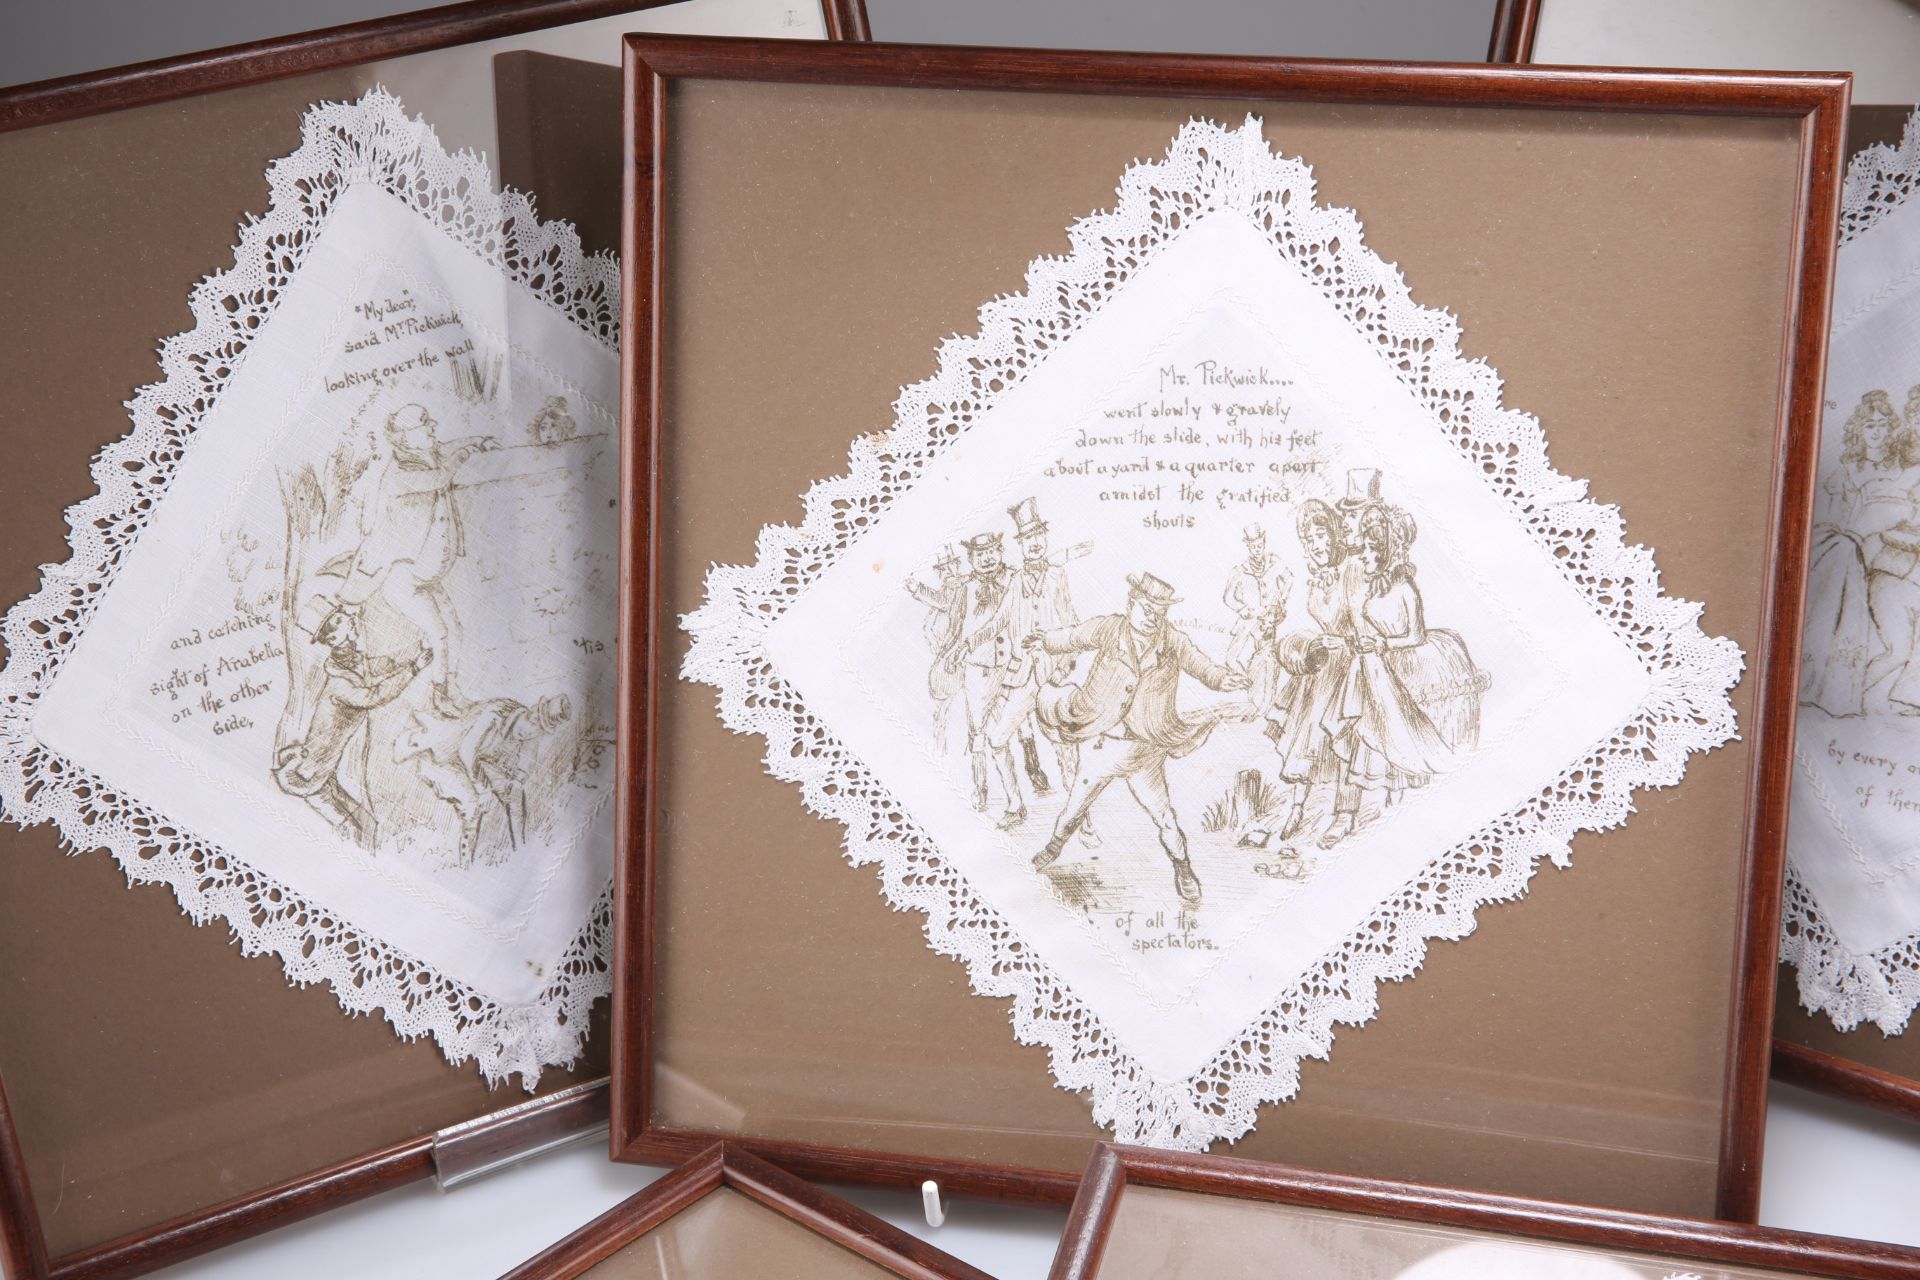 A GROUP OF FIVE CHARLES DICKENS PICKWICK PAPERS PRINTED LACE EDGED HANDKERCHIEFS - Image 2 of 2